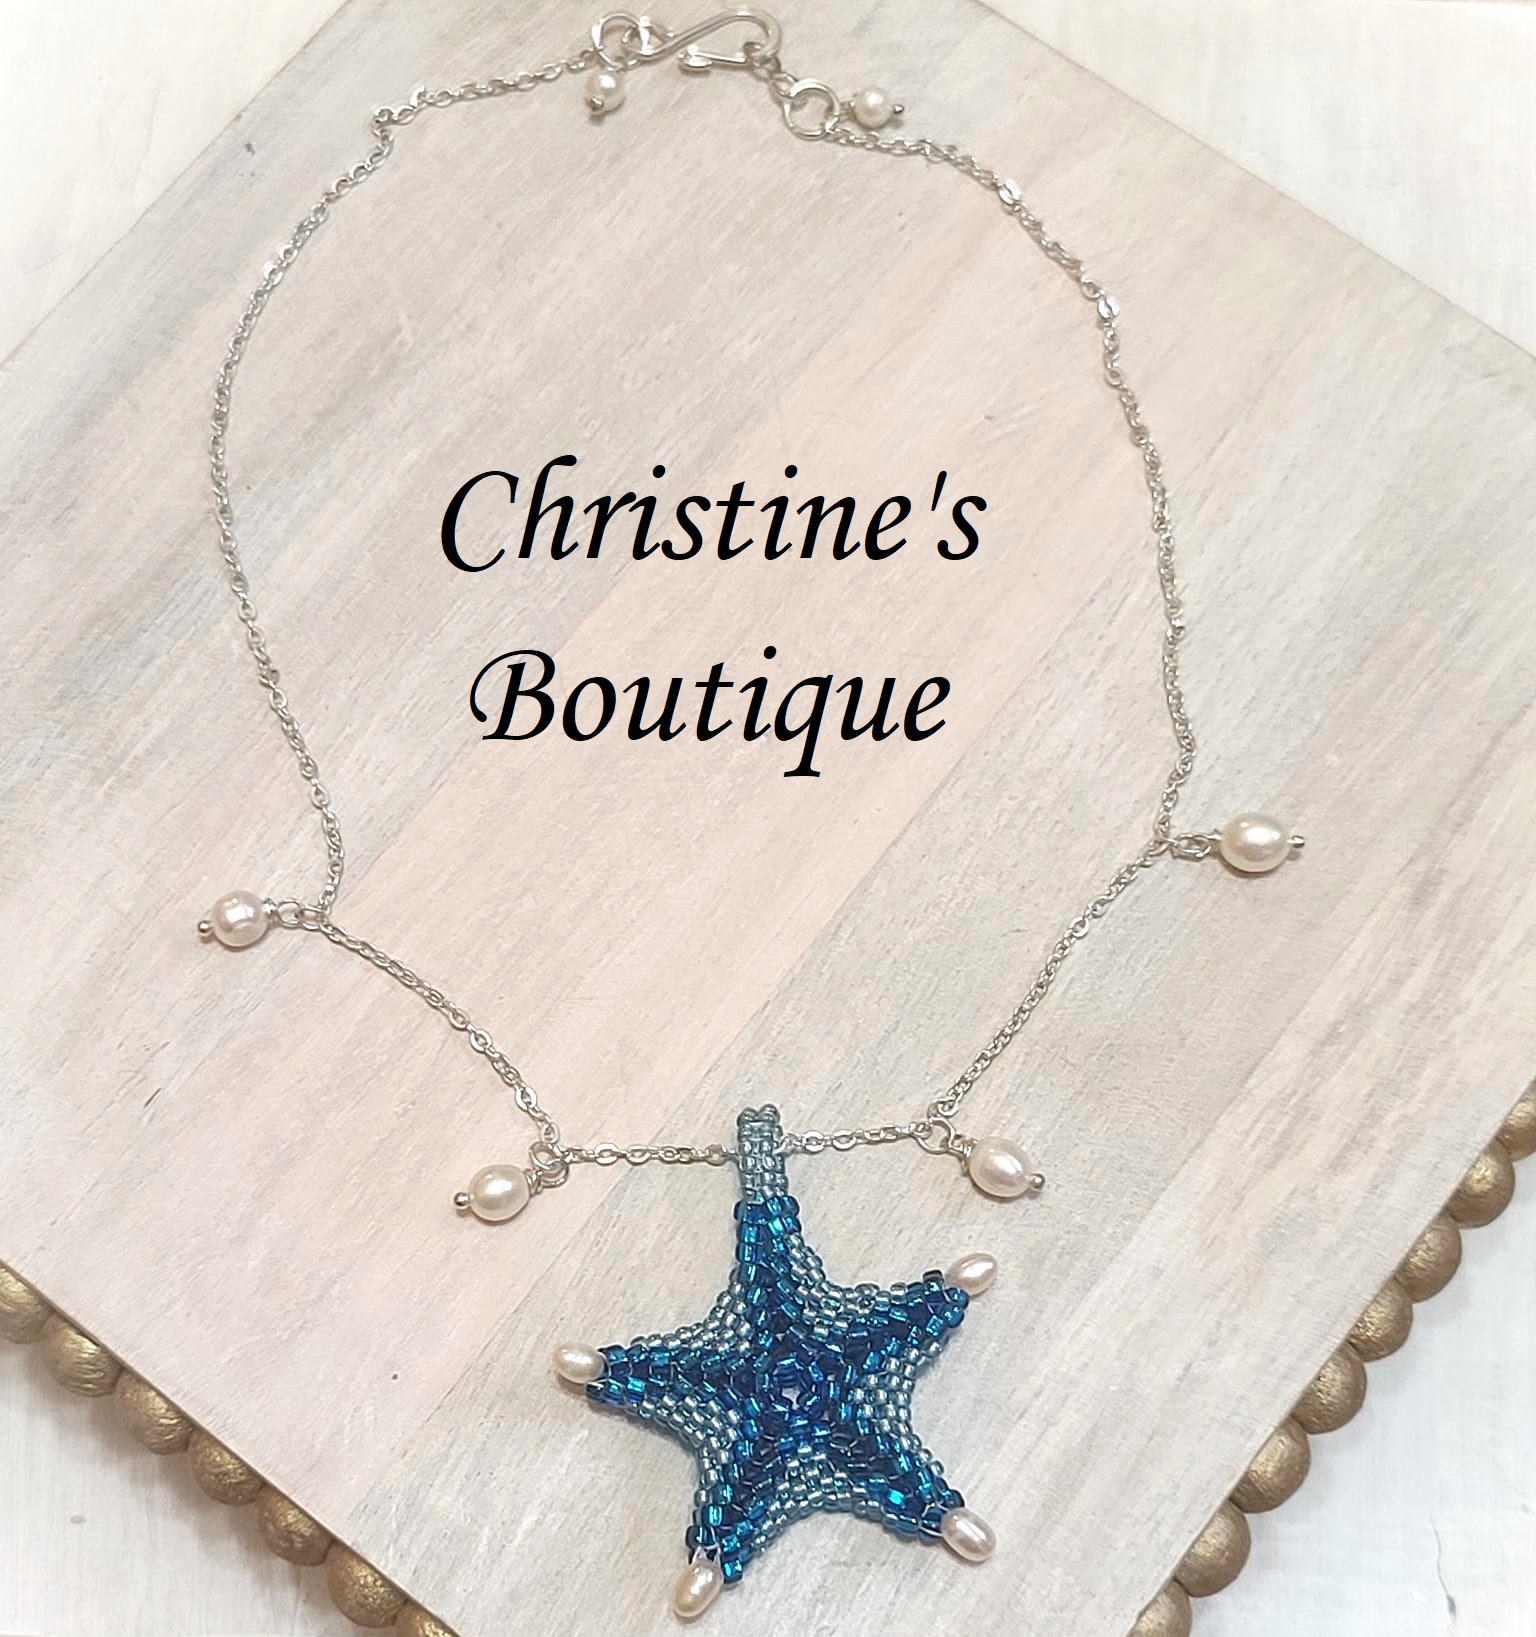 Starfish pendant handcrafted w pearls, sterling silver necklace